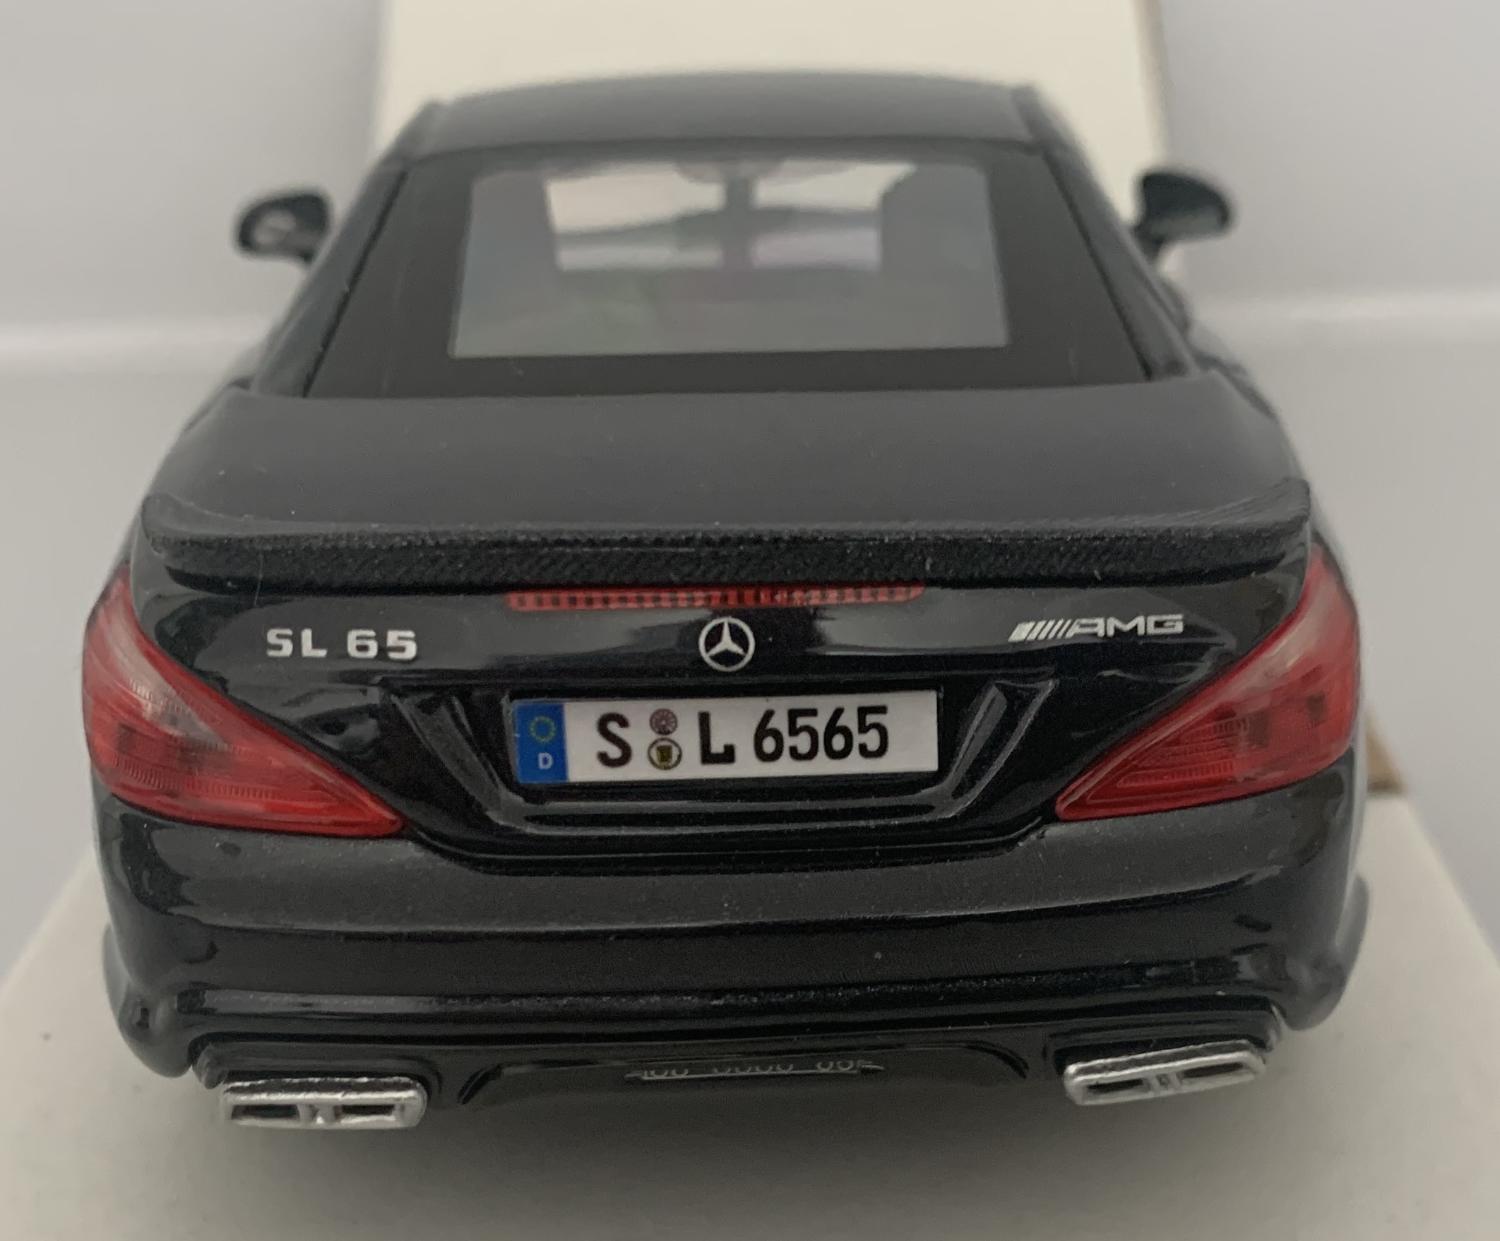 An excellent scale model of a Mercedes Benz SL 65 AMG decorated in black with rear spoiler and silver wheels.  Other trims are finished in chrome and silver.